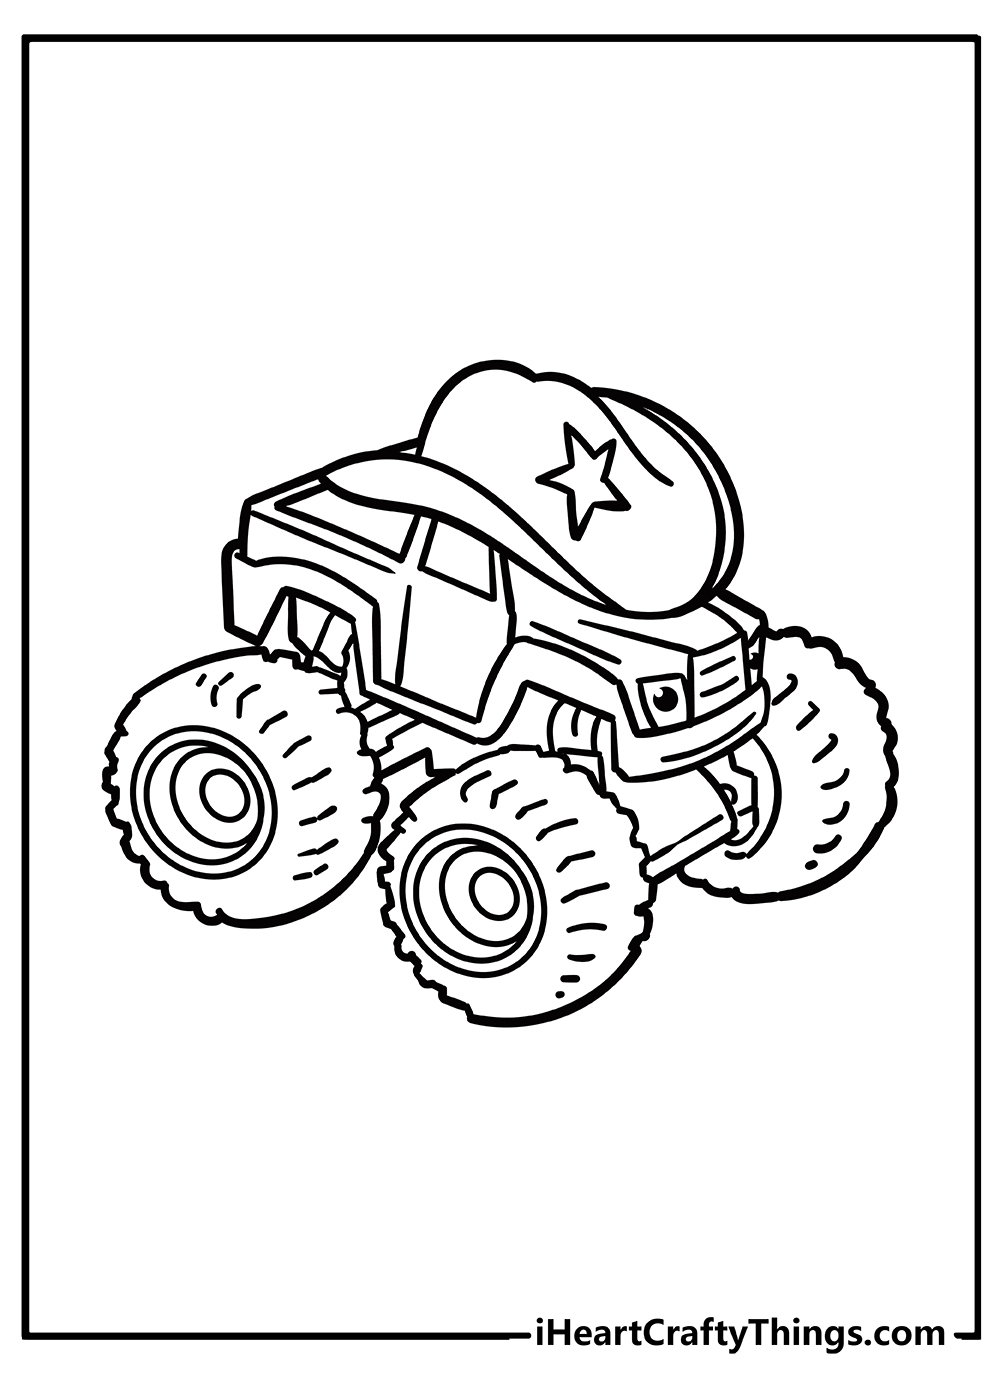 Blaze Easy Coloring Pages